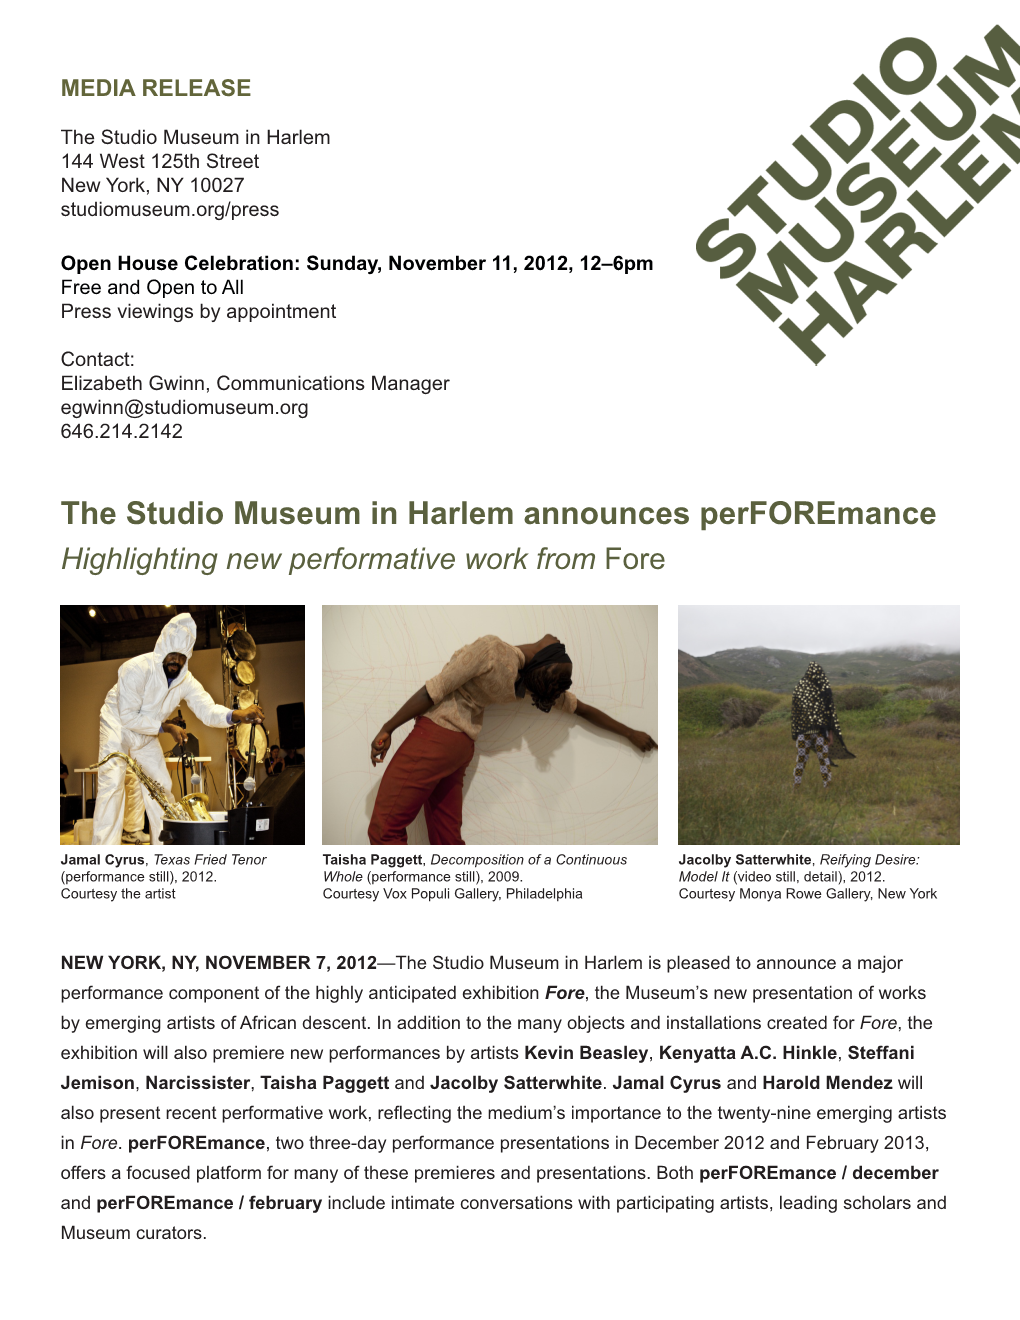 The Studio Museum in Harlem Announces Perforemance Highlighting New Performative Work from Fore